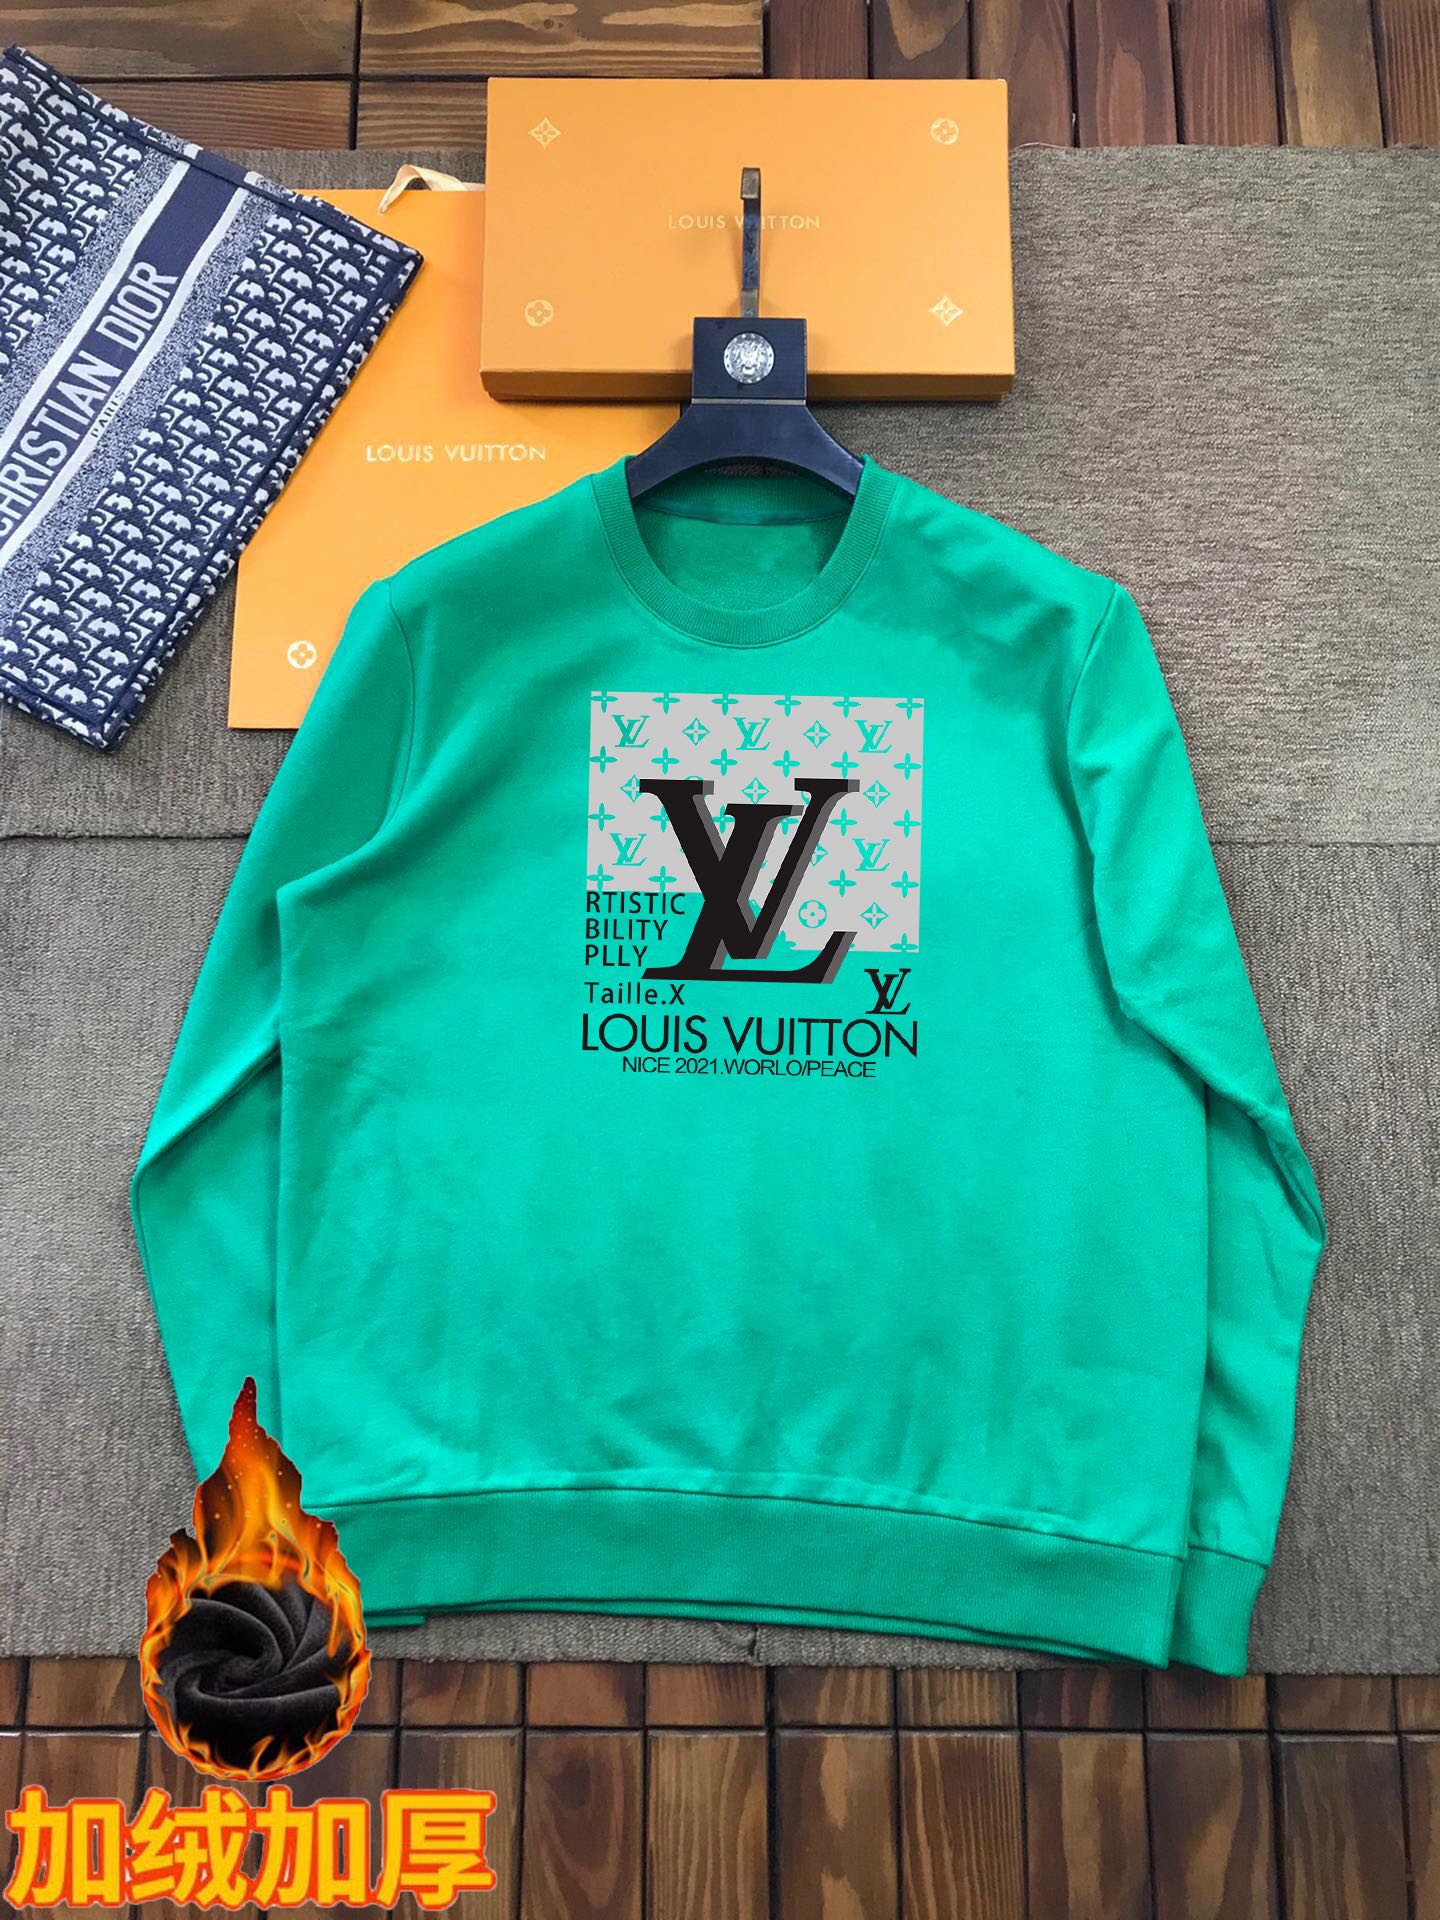 2023 Replica Wholesale Cheap Sales Online
 Louis Vuitton Clothing Sweatshirts Unisex Fall Collection Long Sleeve